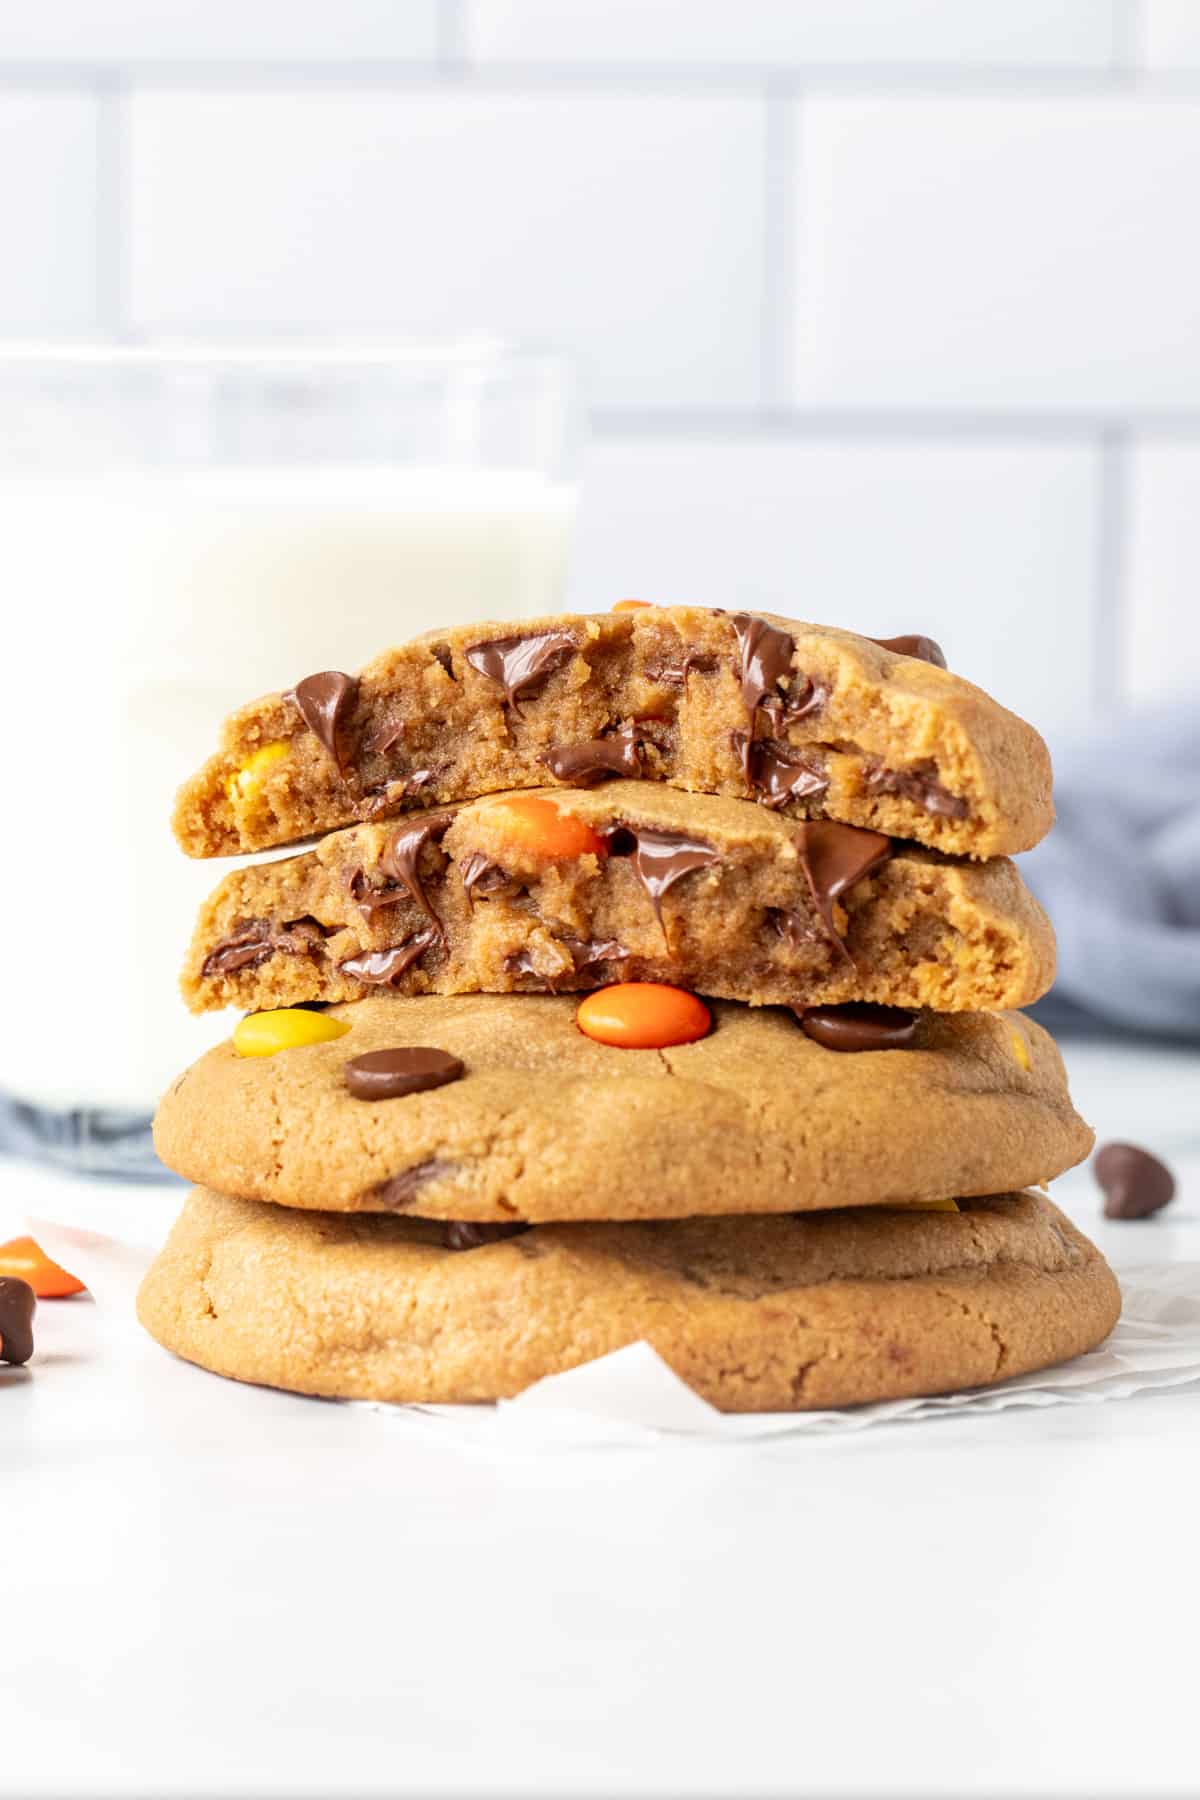 Stack of Reese's Pieces peanut butter cookies, with the top cookie broken in half.